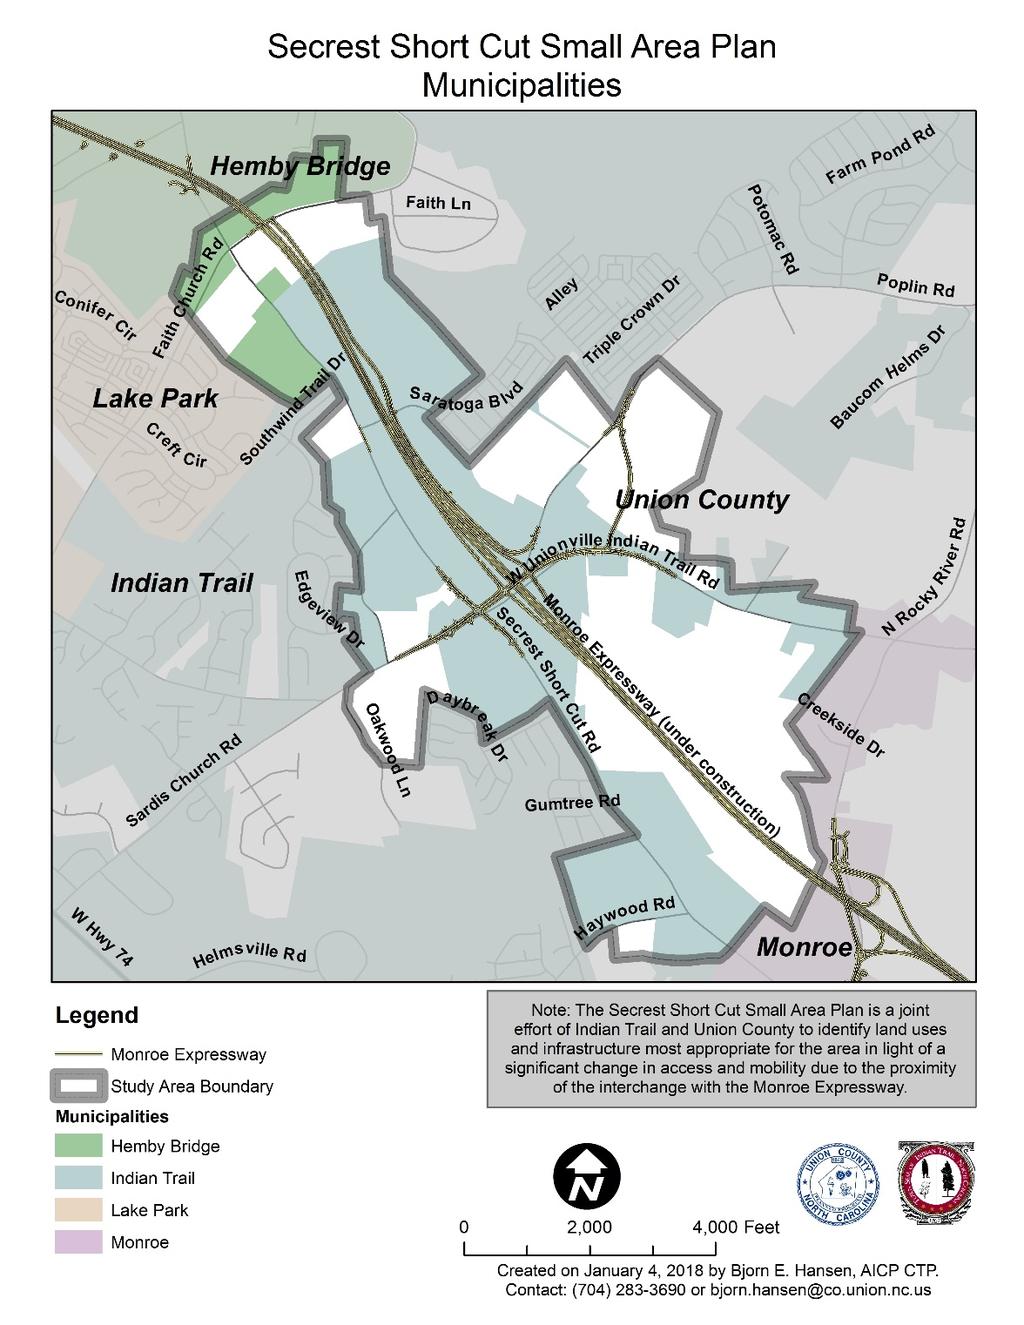 Local Jurisdictions Indian Trail is responsible for the majority of land in the study area, and Hemby Bridge has a small portion in